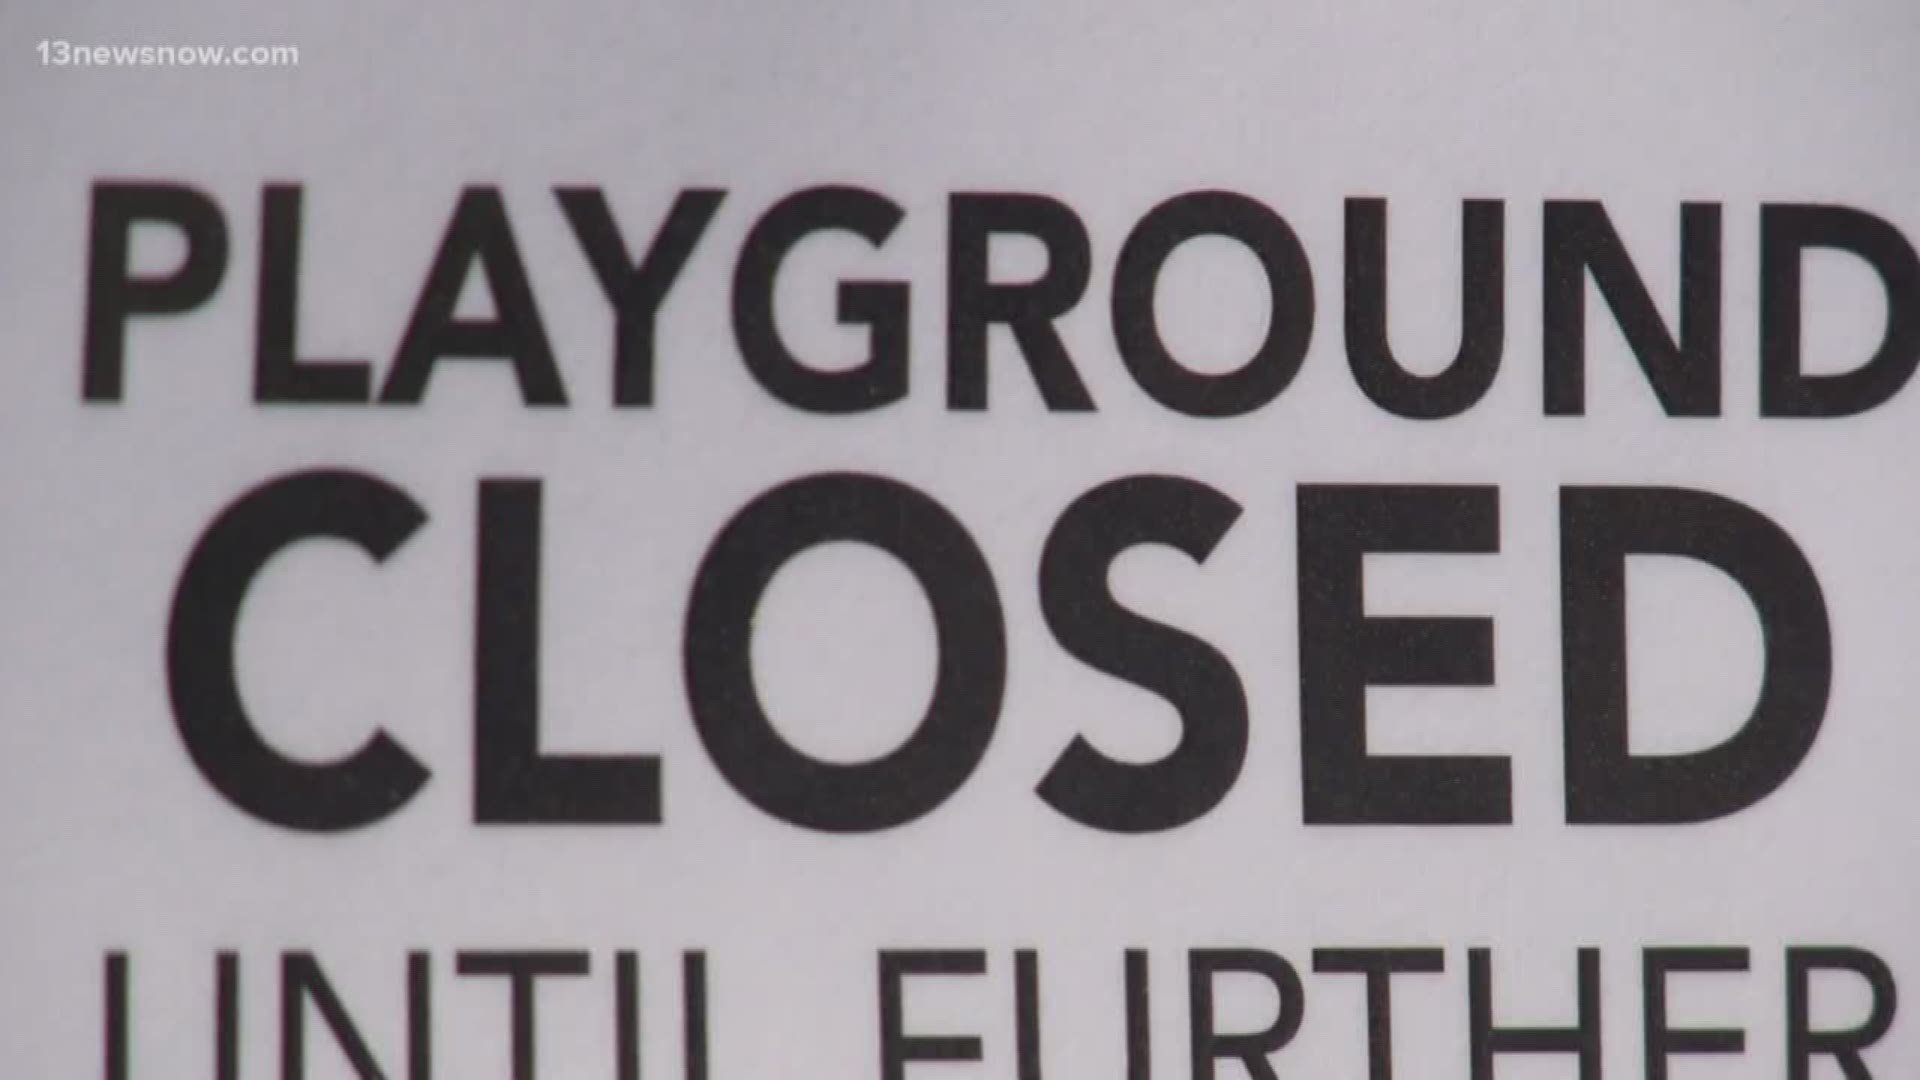 Virginia Beach families were sad to see parks and playground temporarily close, but said they understand it's important for slowing the spread of coronavirus.